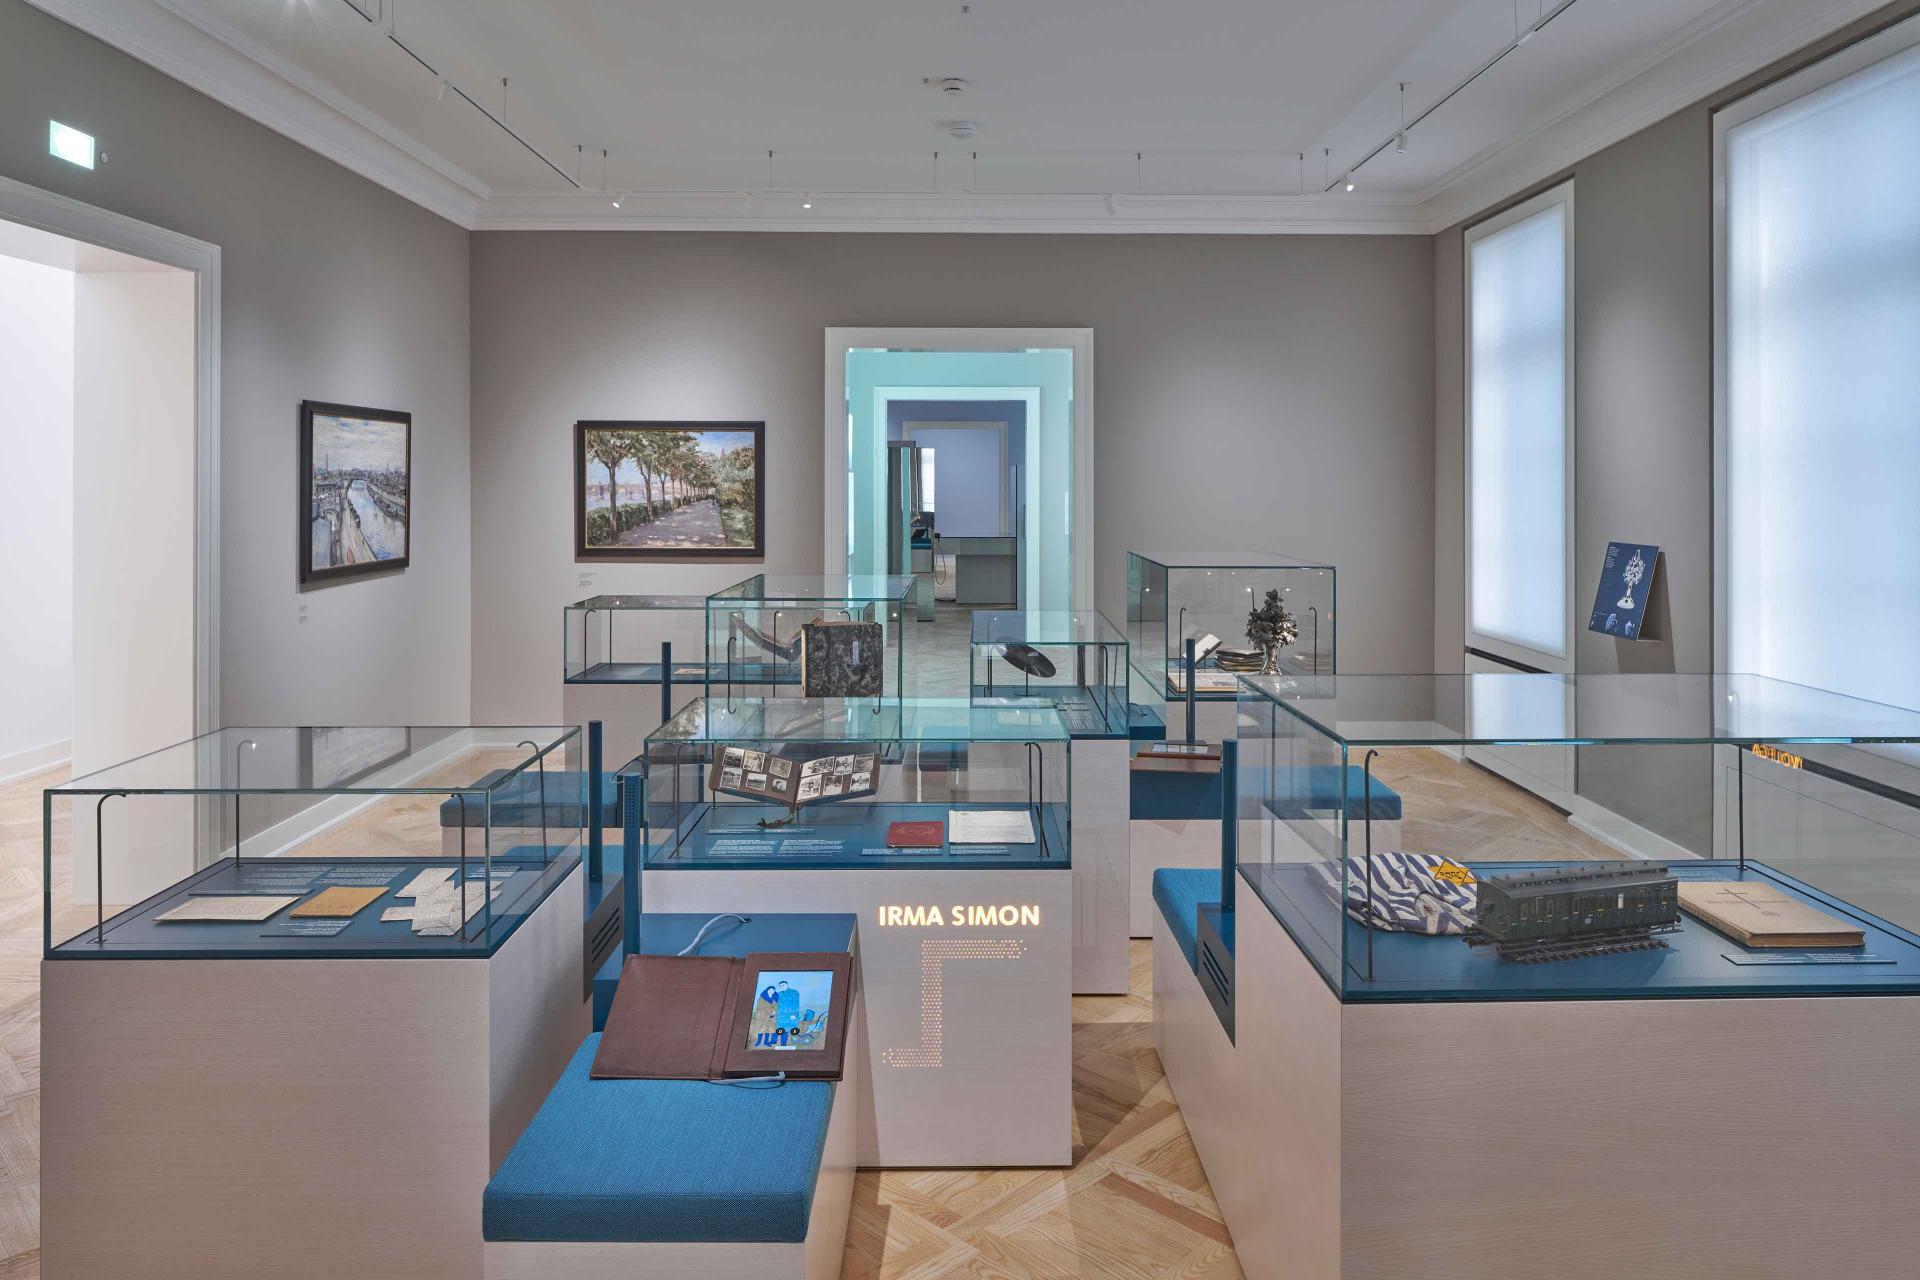 Exhibition space with showcases containing objects on a blue background.